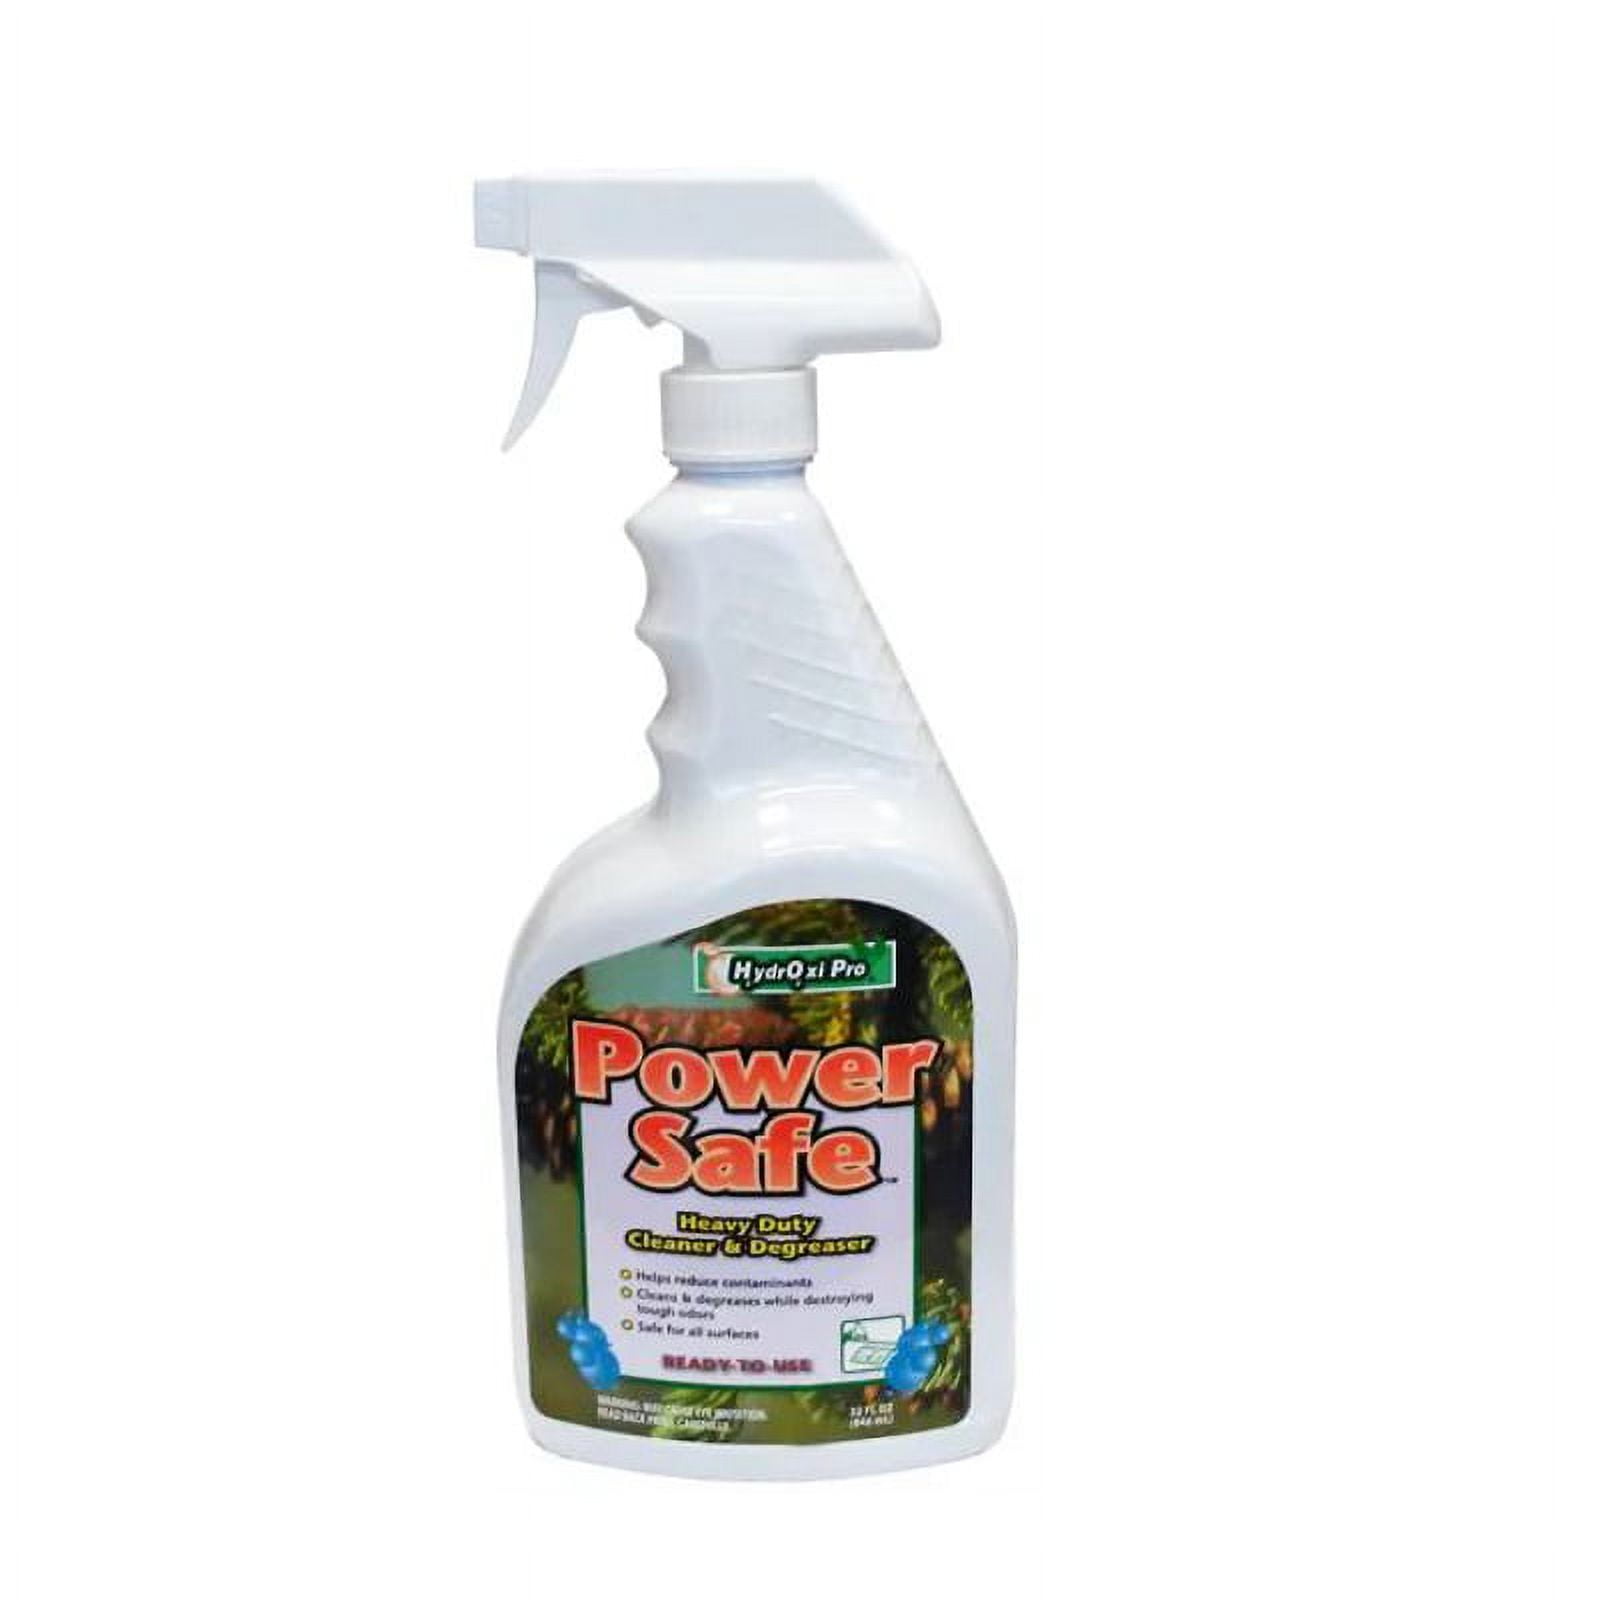 Zep TKO Heavy-Duty Industrial Hand Cleaner - 1 Gal (Case of 4) - 1049524 -  The Go-To Hand Cleaner fo…See more Zep TKO Heavy-Duty Industrial Hand